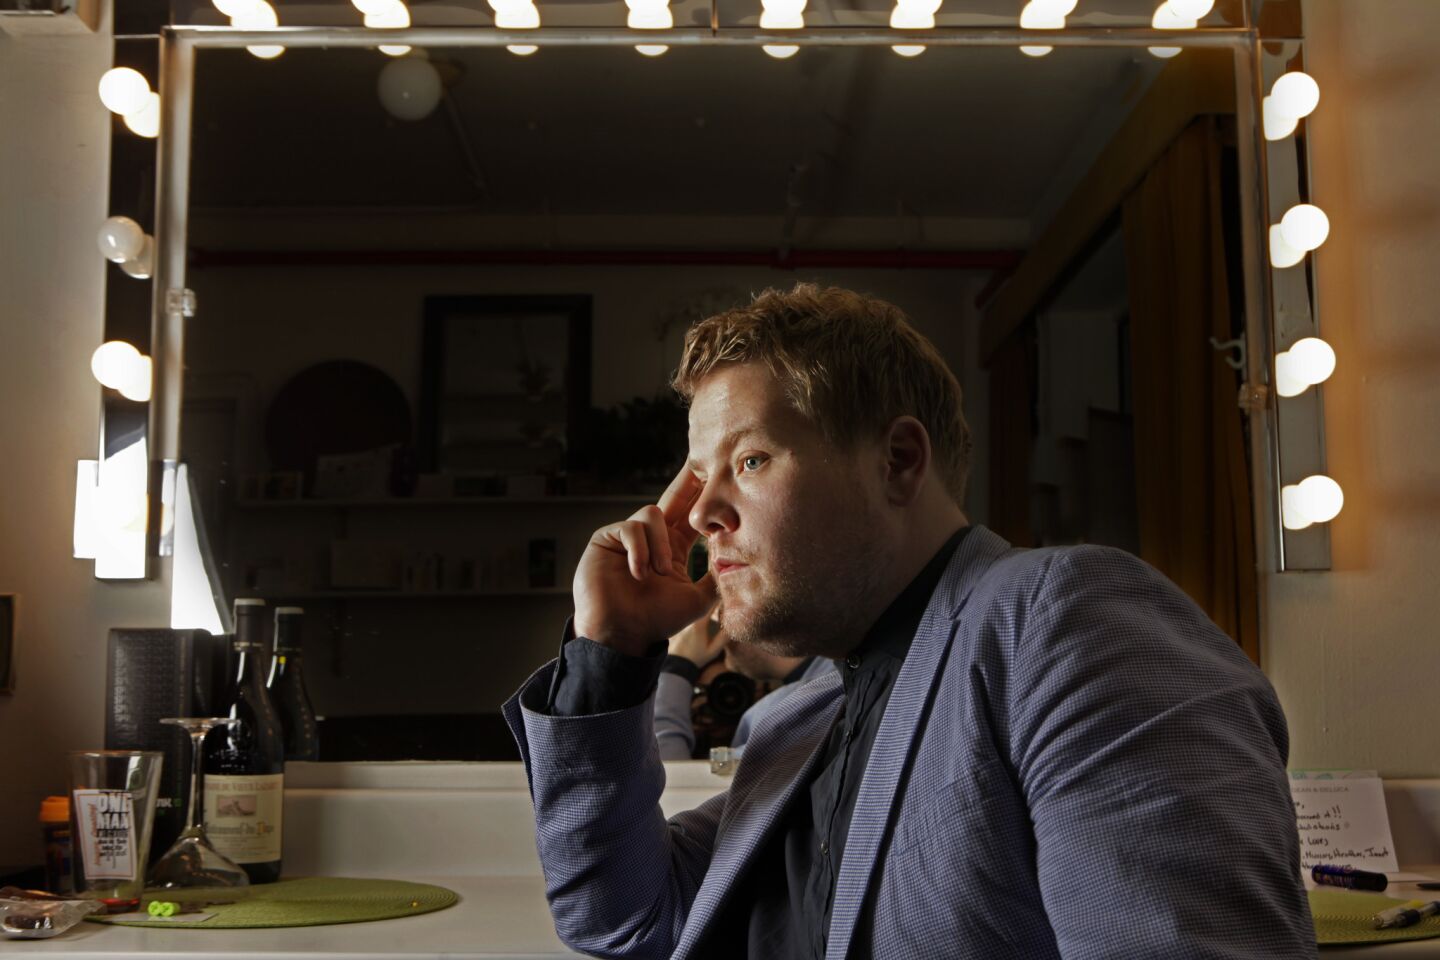 Arts and culture in pictures by The Times | 'One Man, Two Guvnors'' James Corden